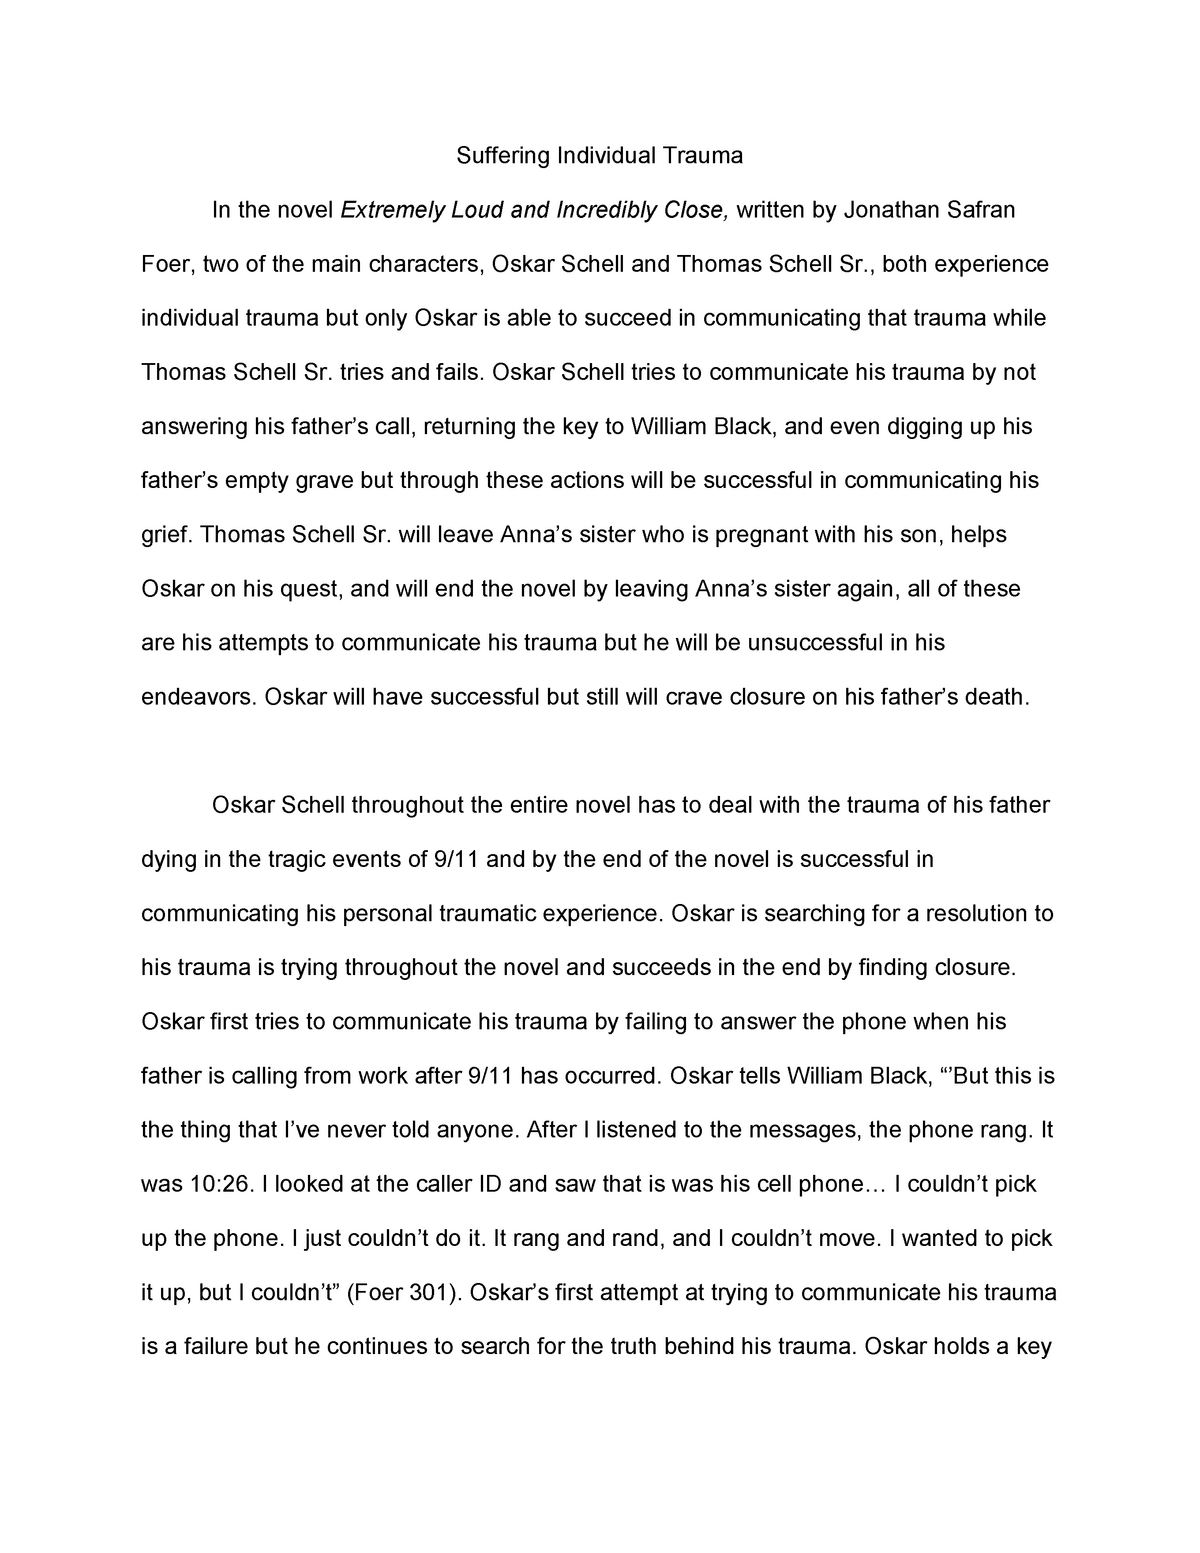 Extremely Loud And Incredibly Close Theme Essay